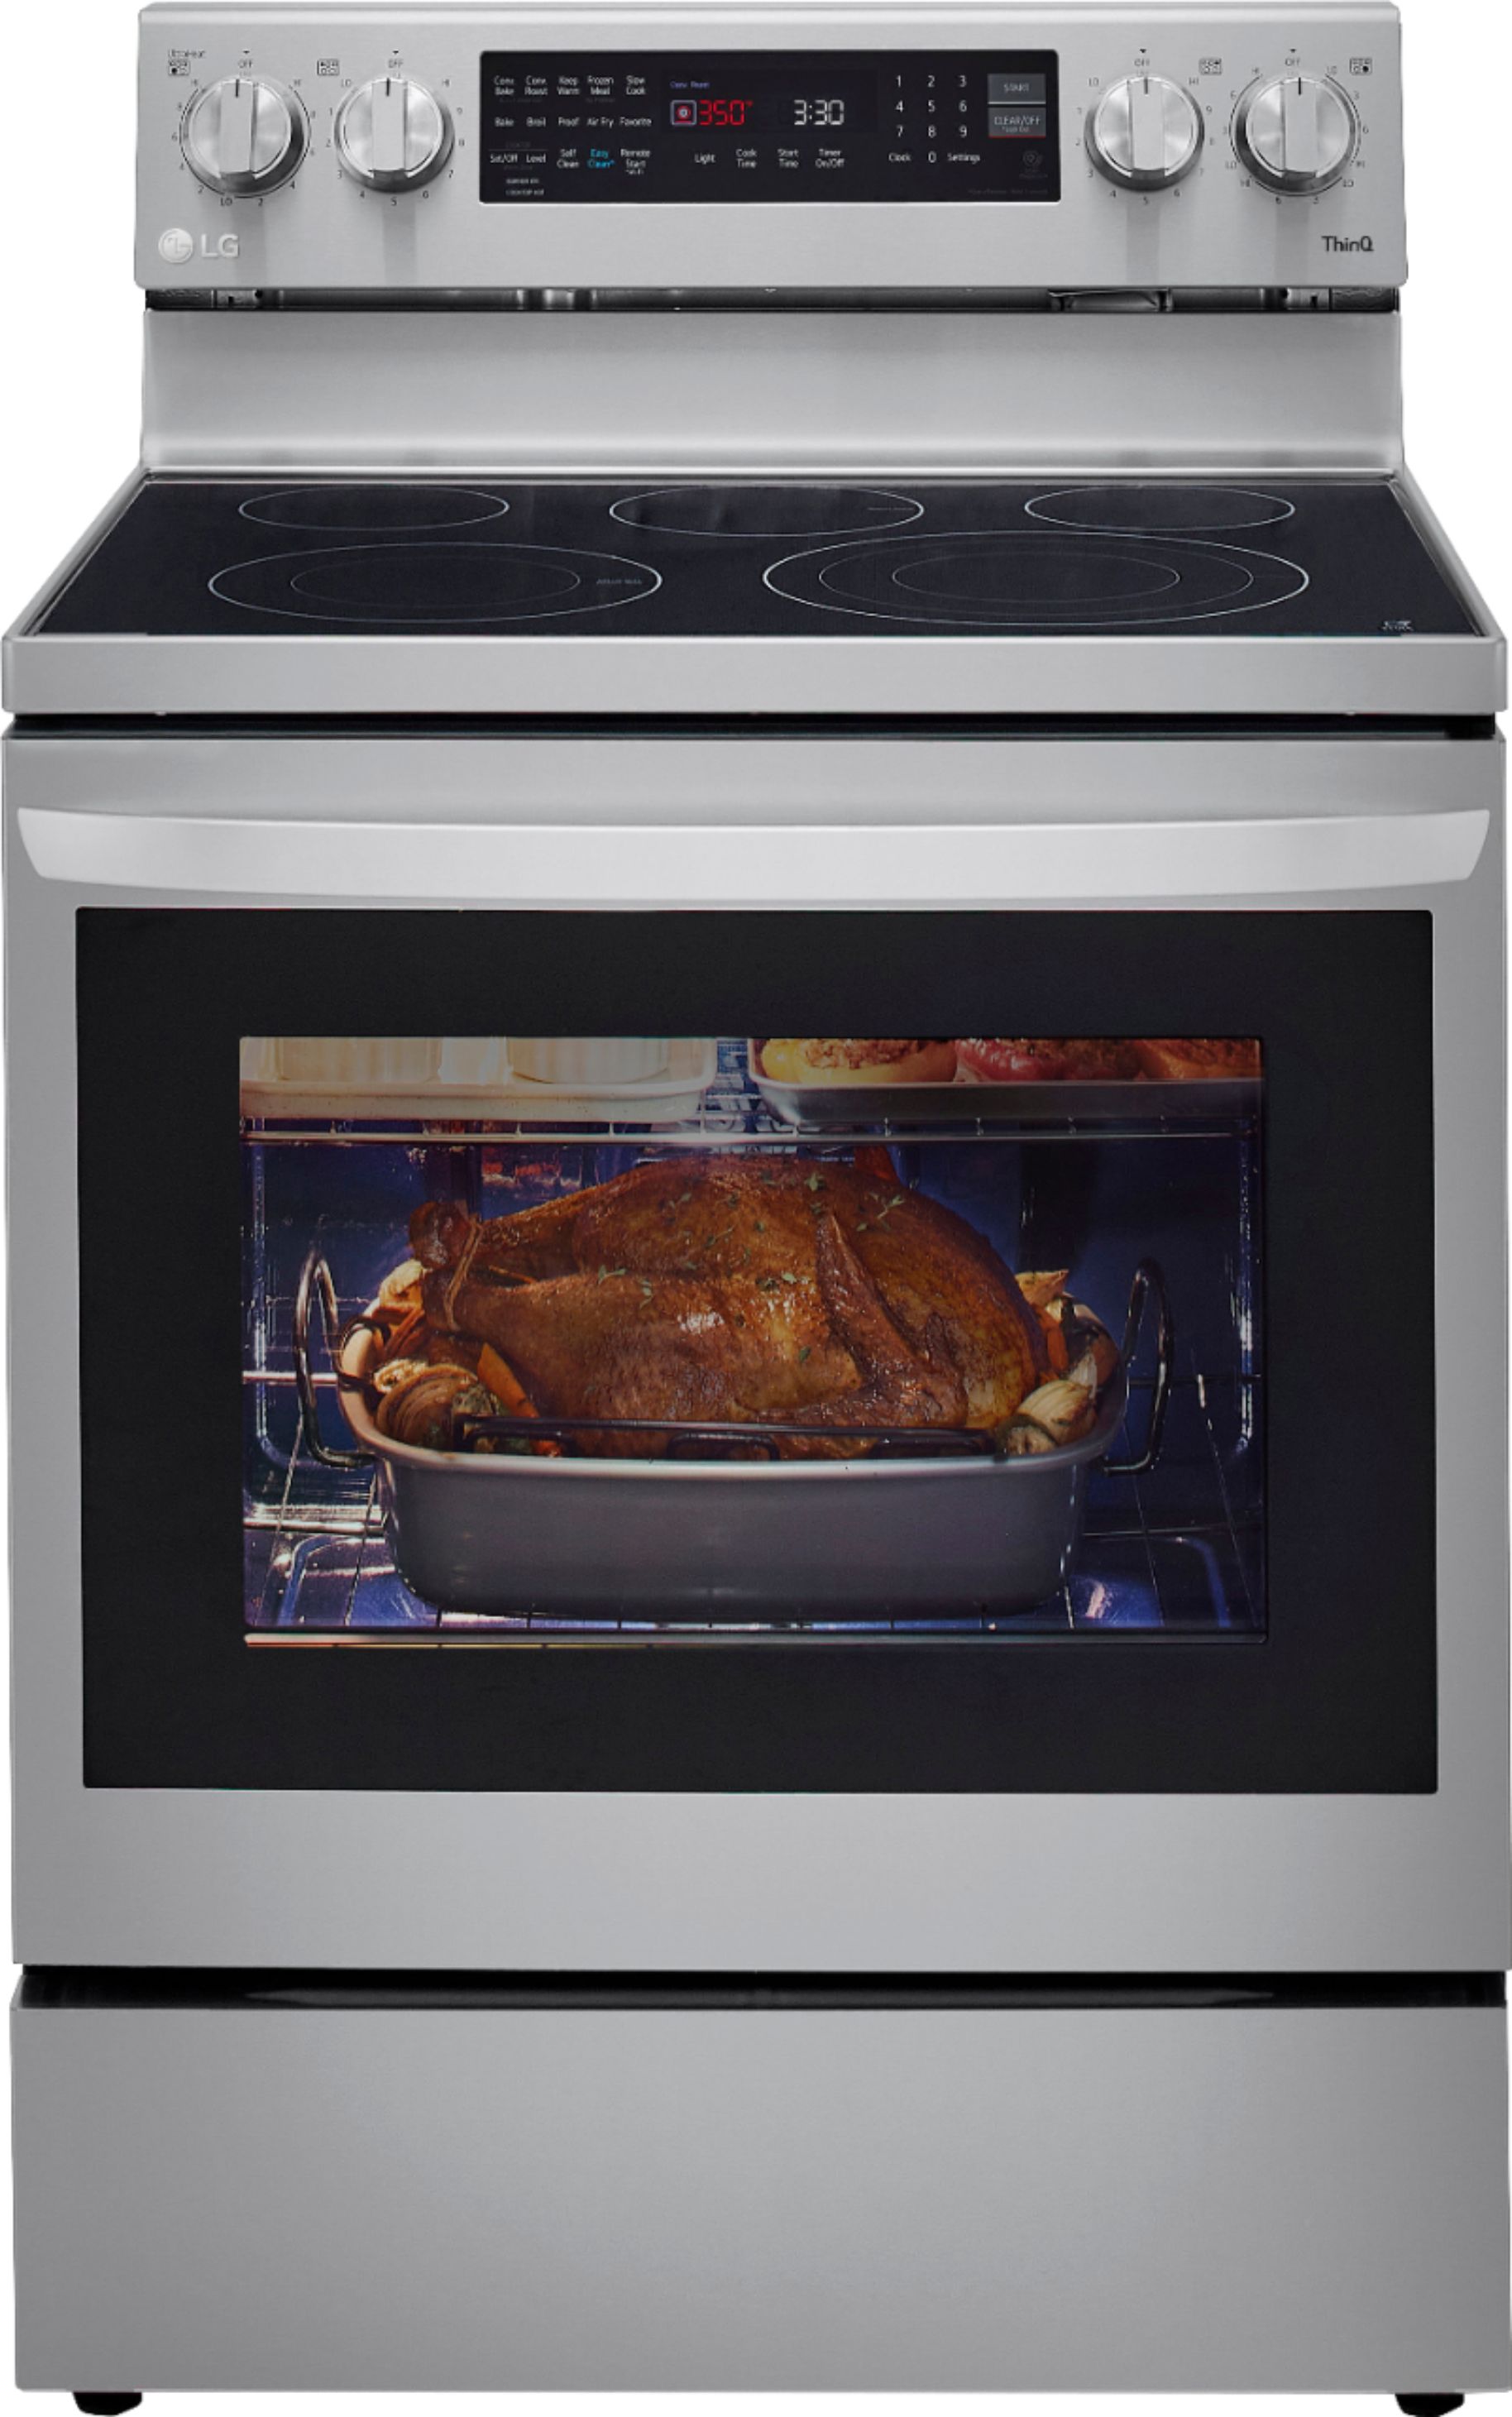 LG 6.3 Cu ft Electric Range with InstaView - Stainless Steel